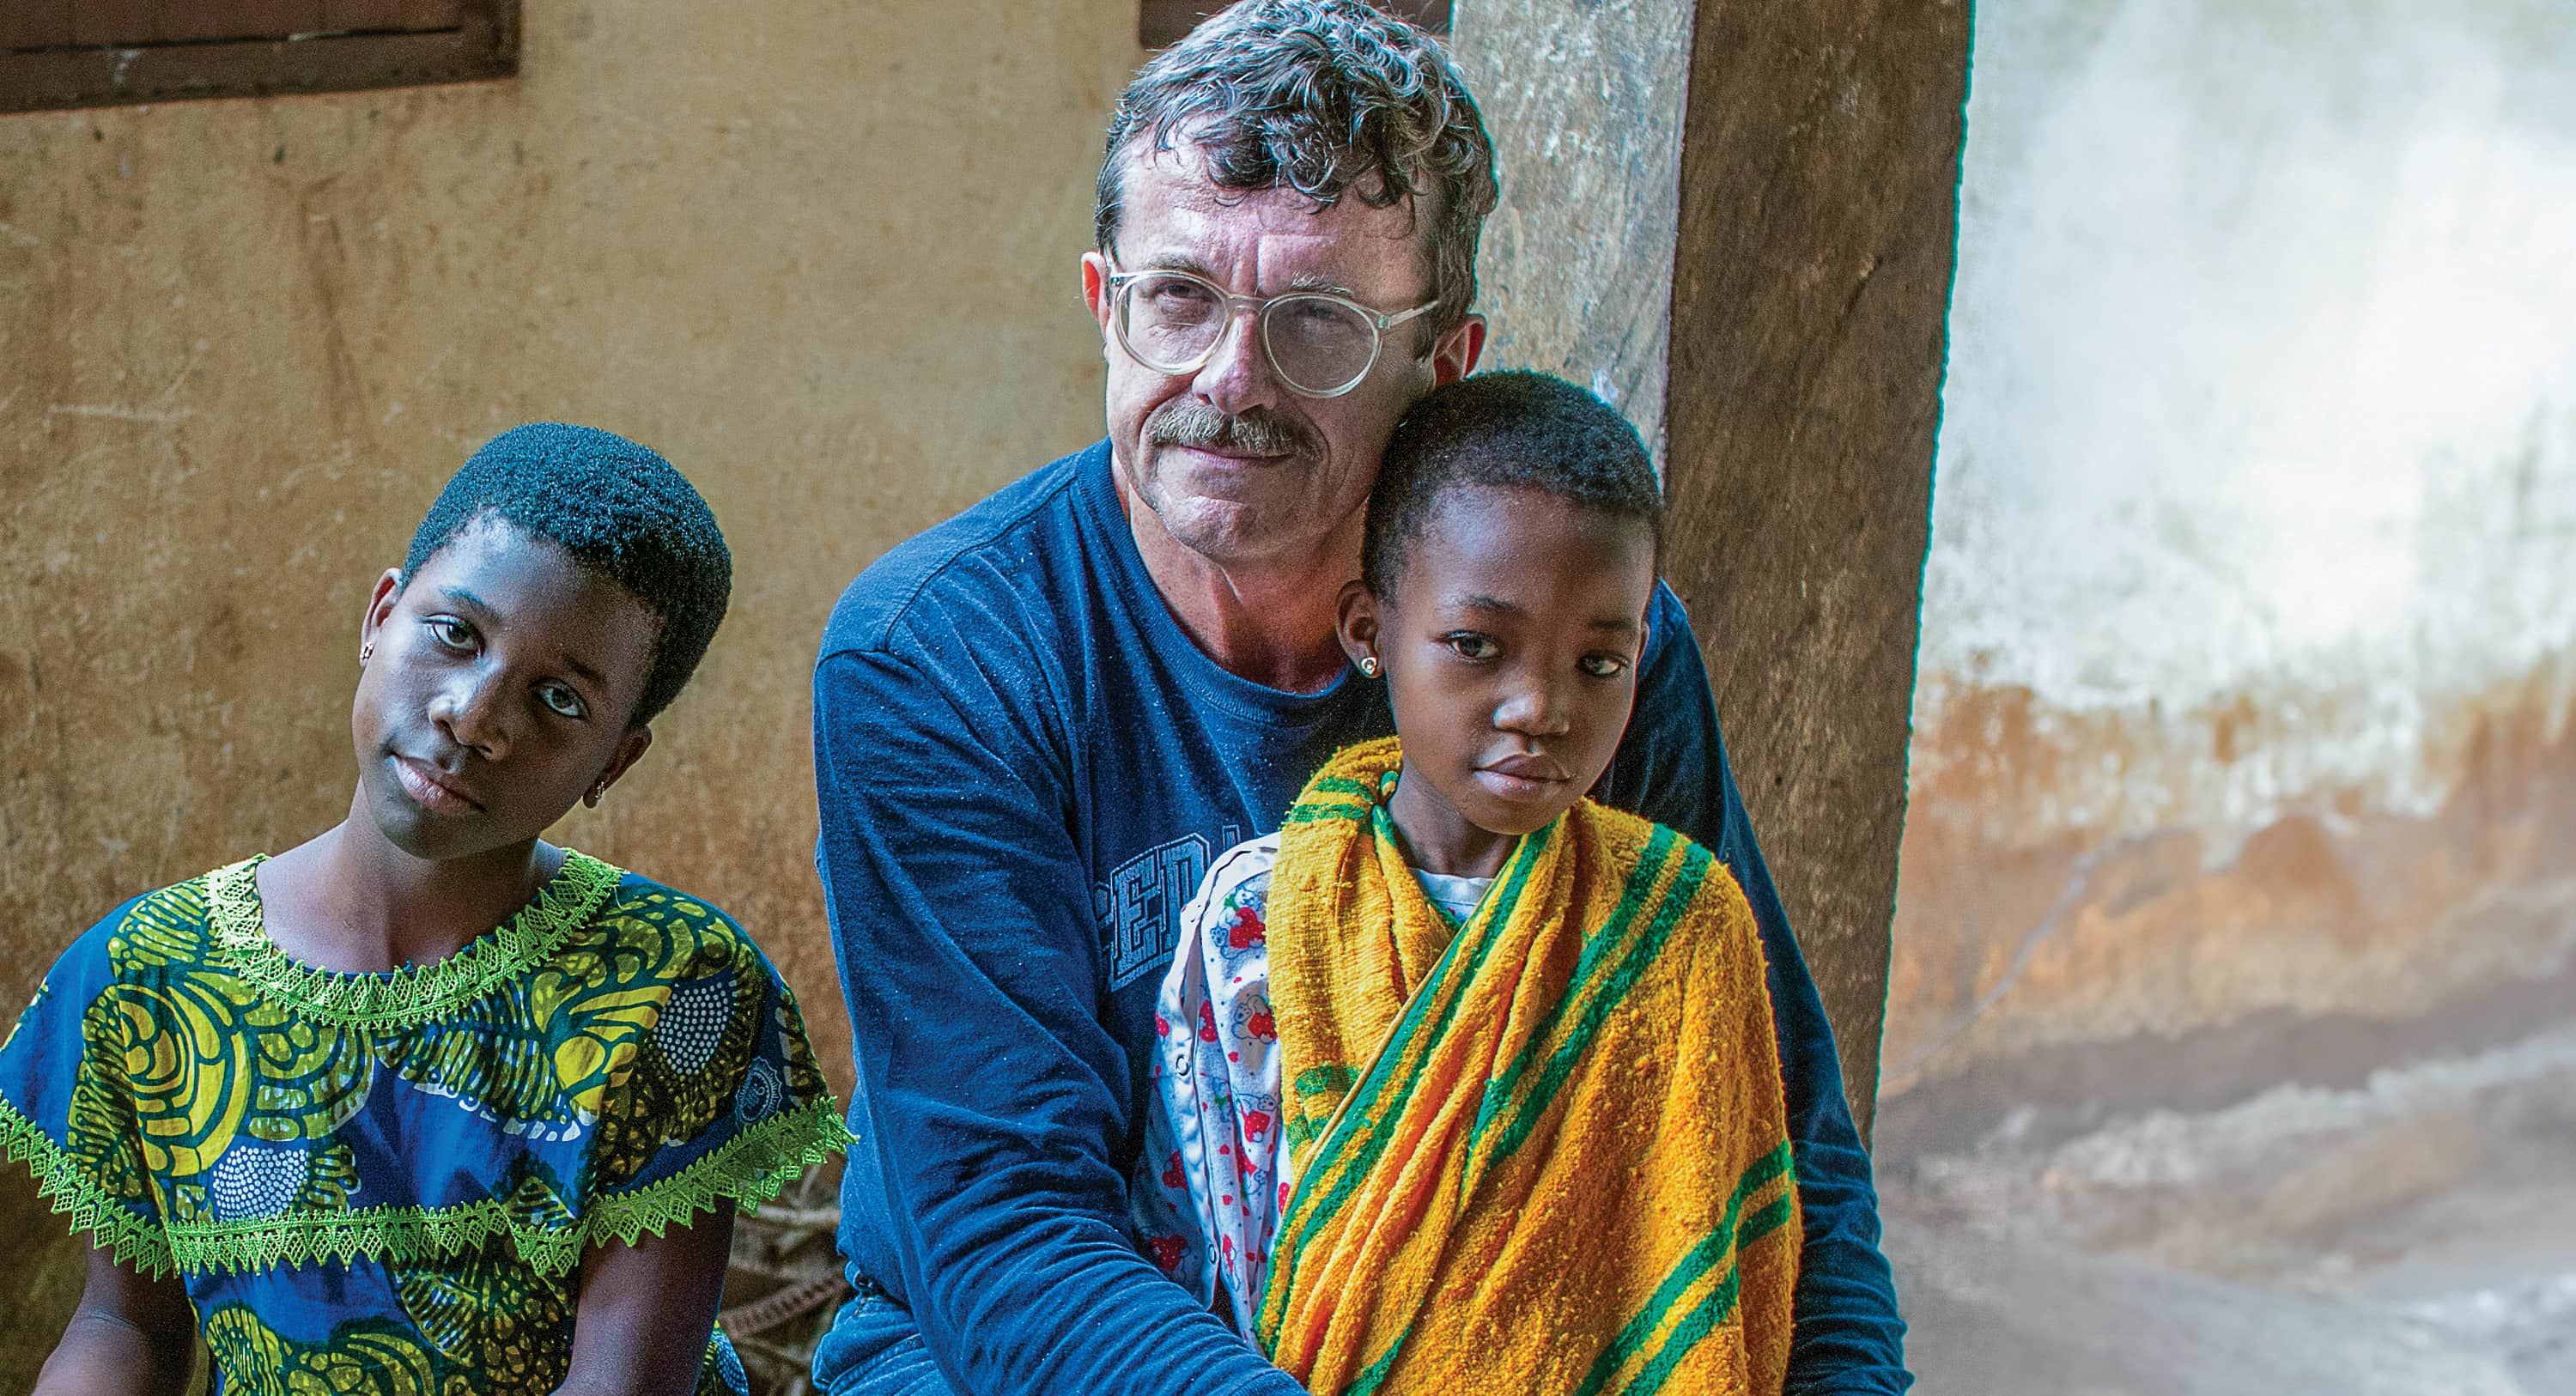 A man with glasses seated alongside two young children inside a rustic building.